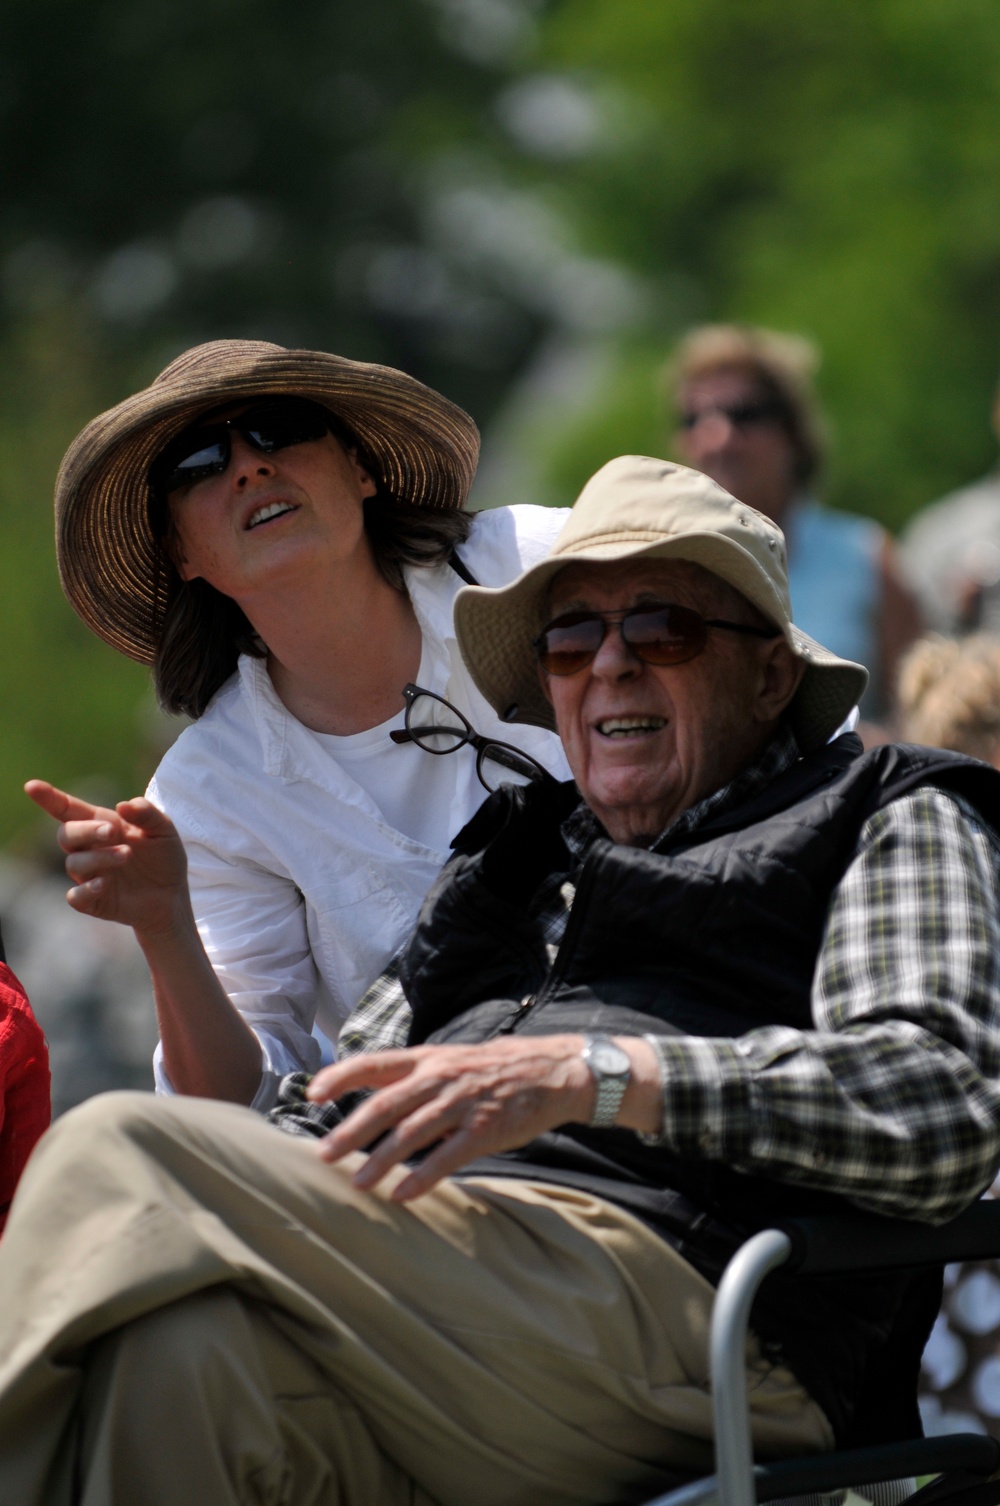 World War II paratrooper watches VE Day flyover from Whipple Field